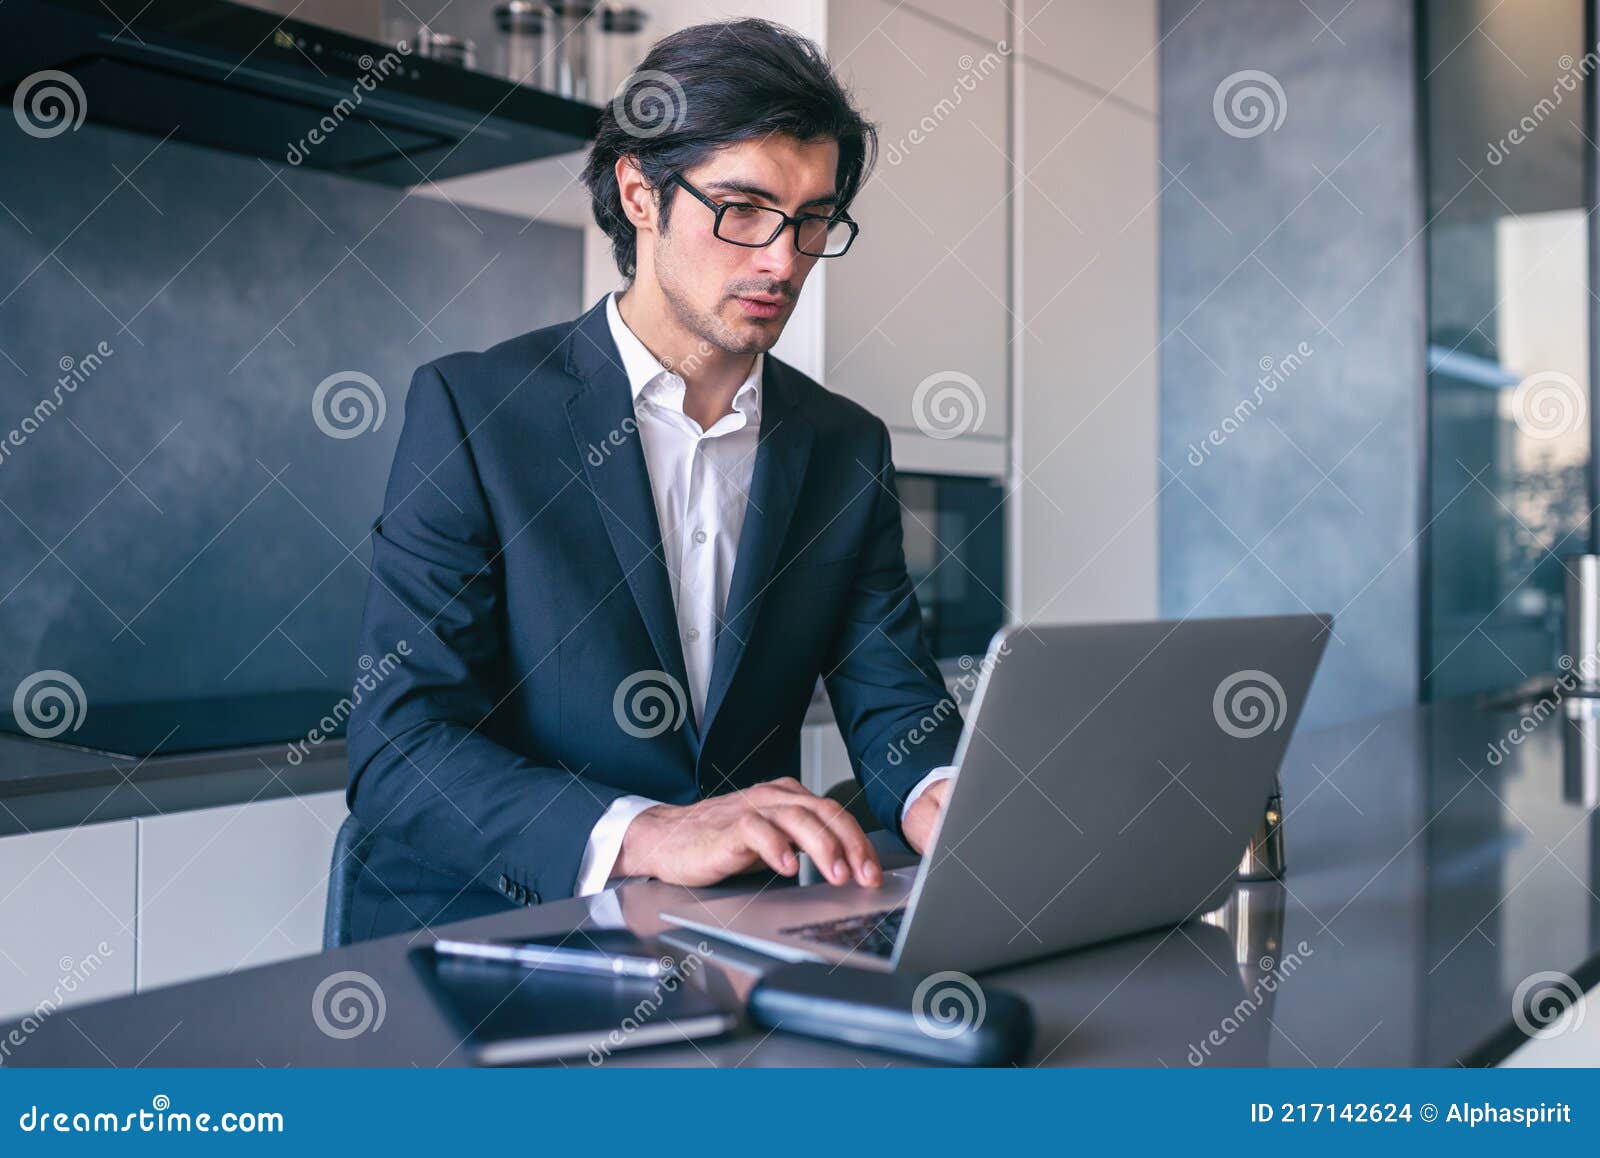 elegant businessman works from home with a laptop. teleworking concept